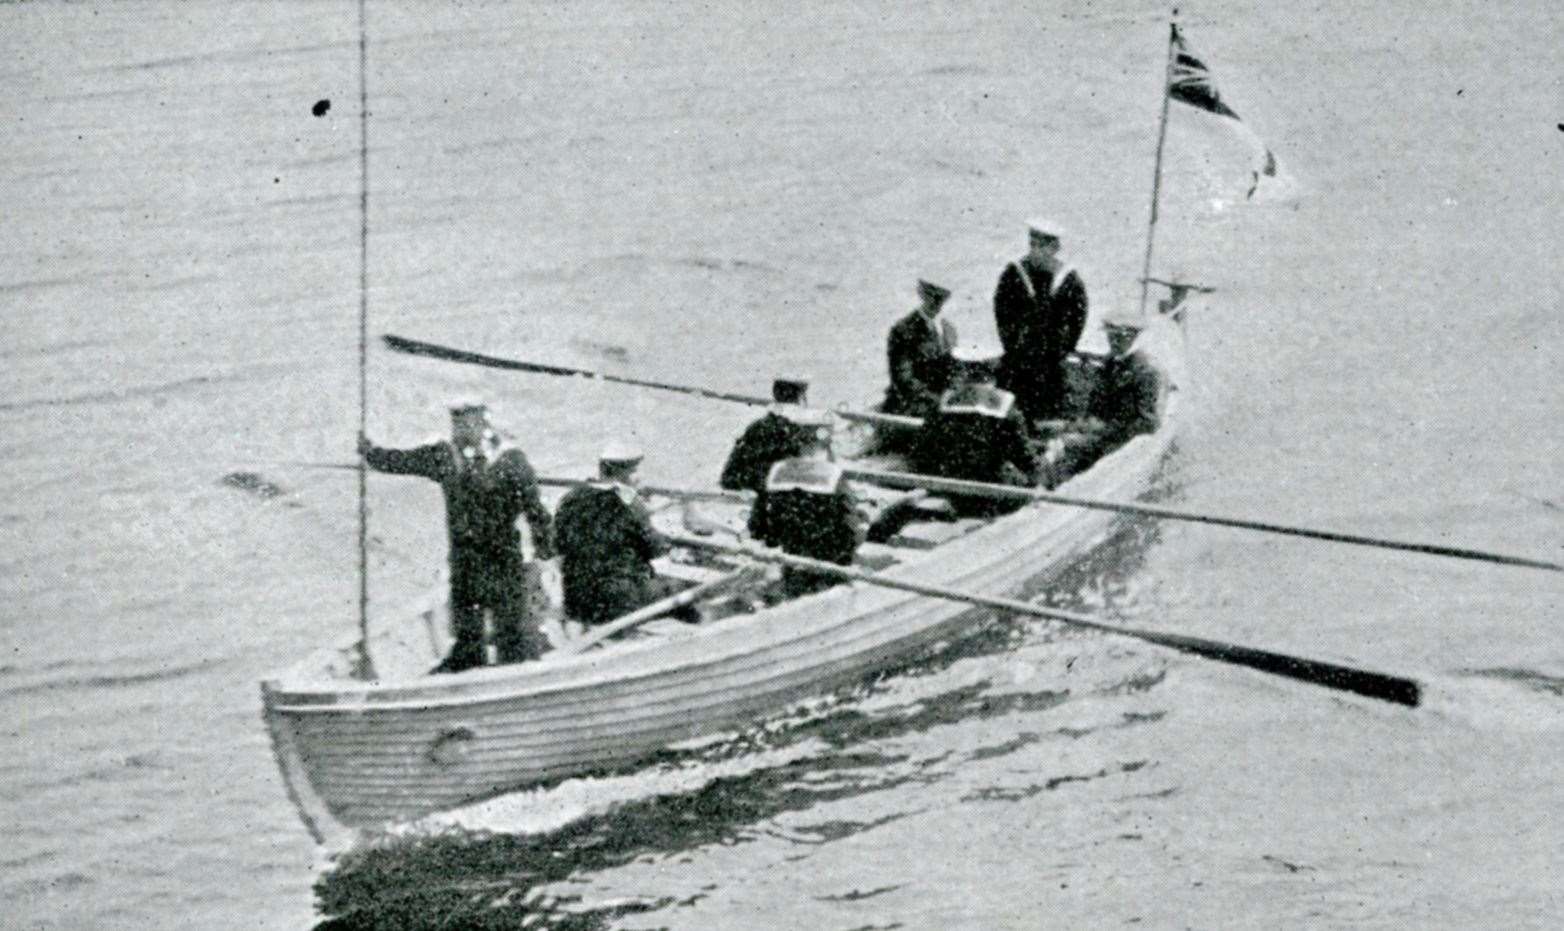 Hawker and Grieve being rowed ashore by bluejackets after arriving at Scrabster.